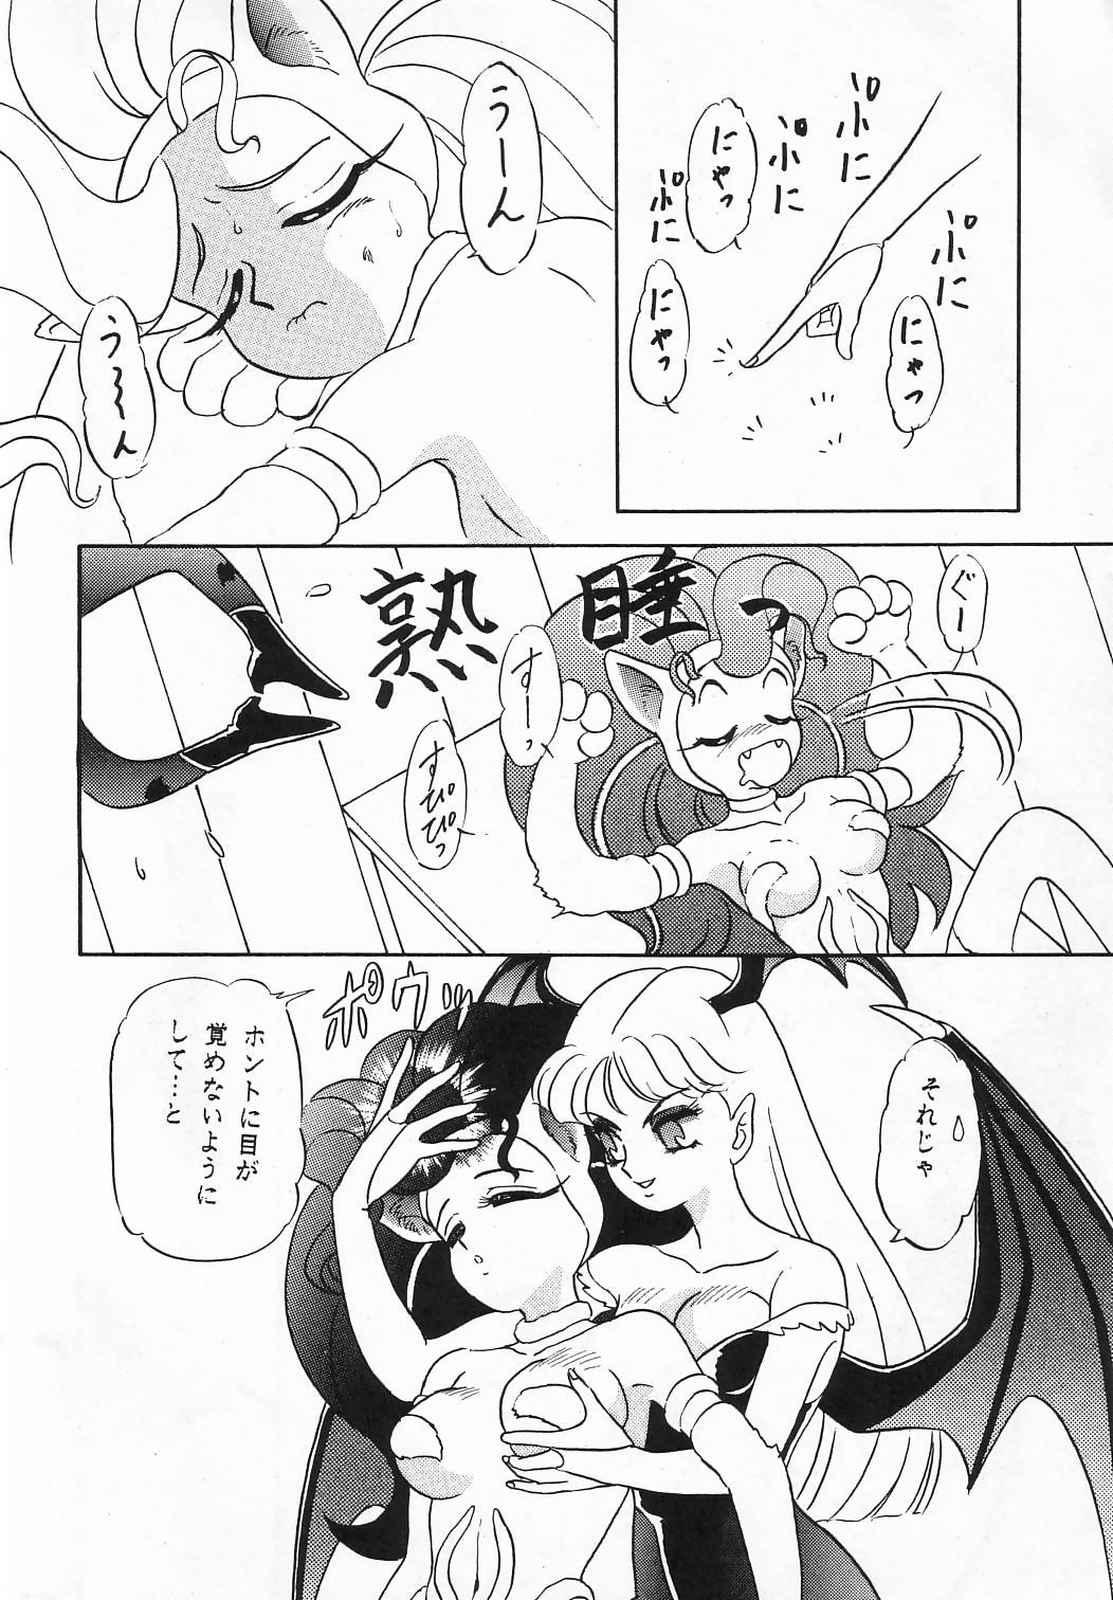 Spa Lunch Box 10 - Lunch Time 2 - Sailor moon Darkstalkers Facials - Page 8